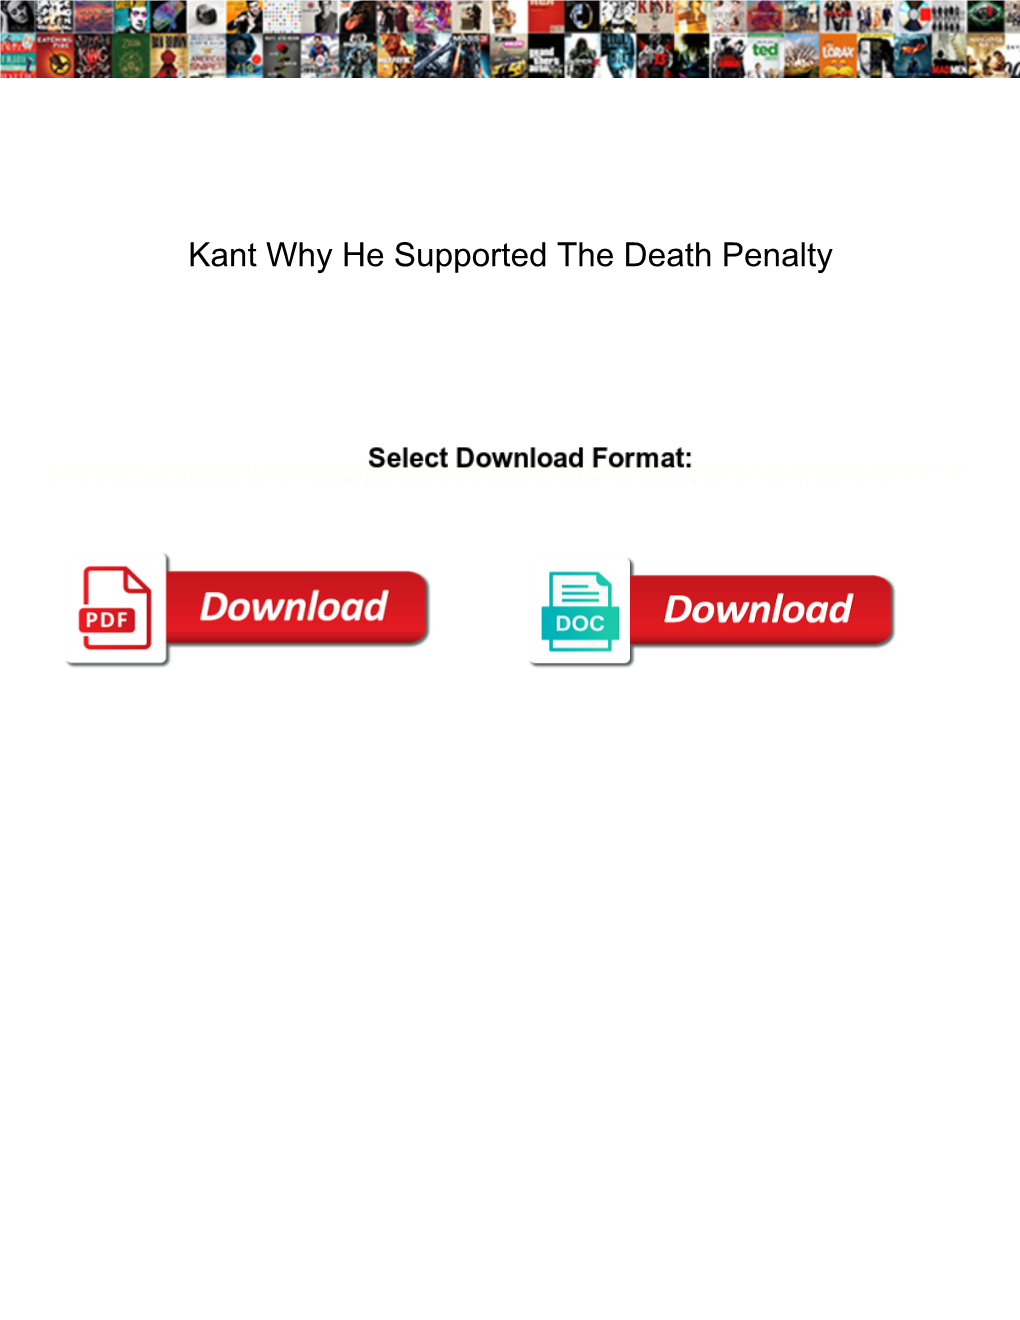 Kant Why He Supported the Death Penalty